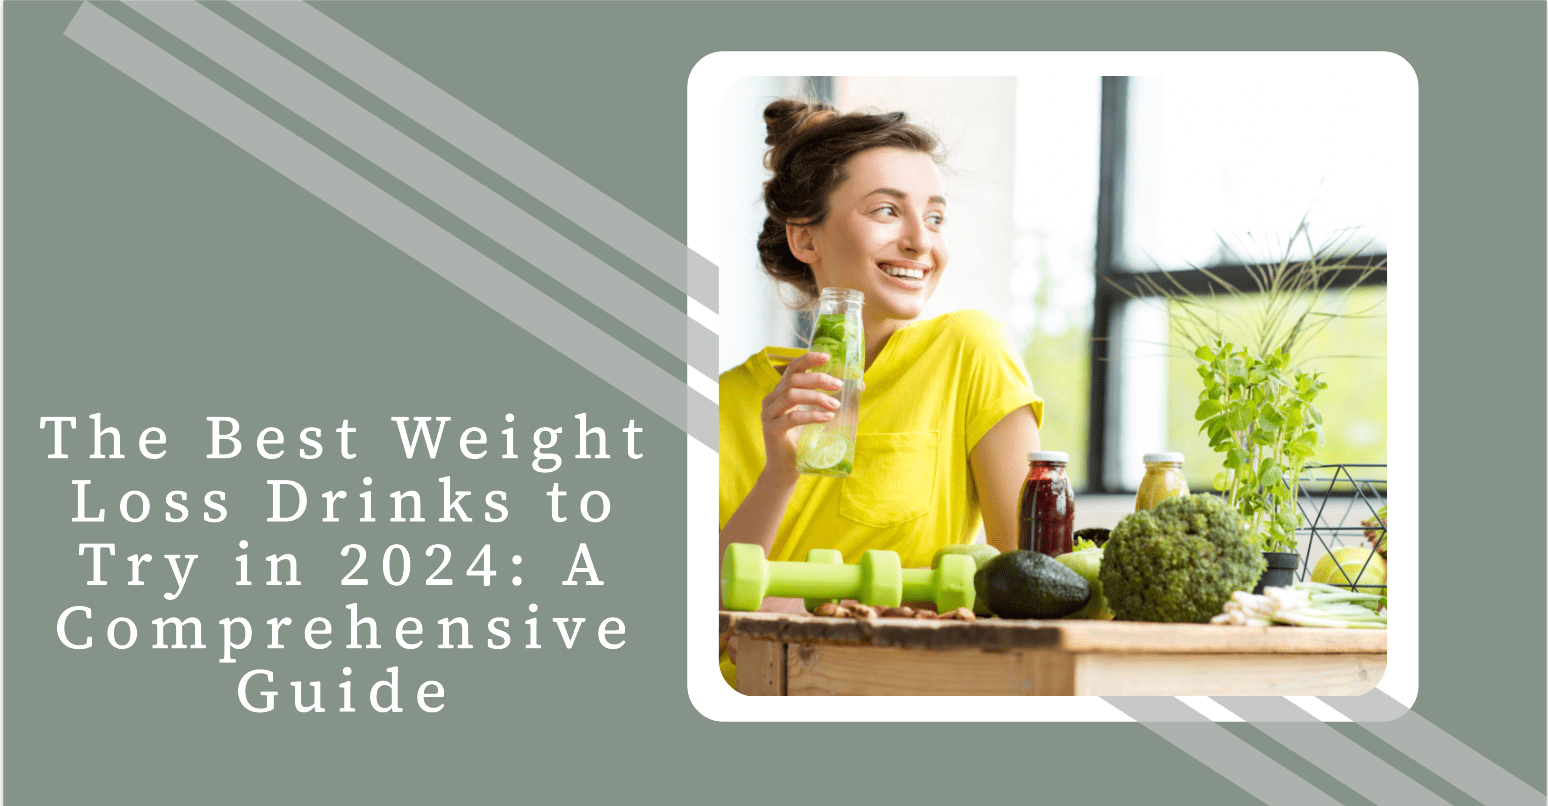 The Best Weight Loss Drinks to Try in 2024